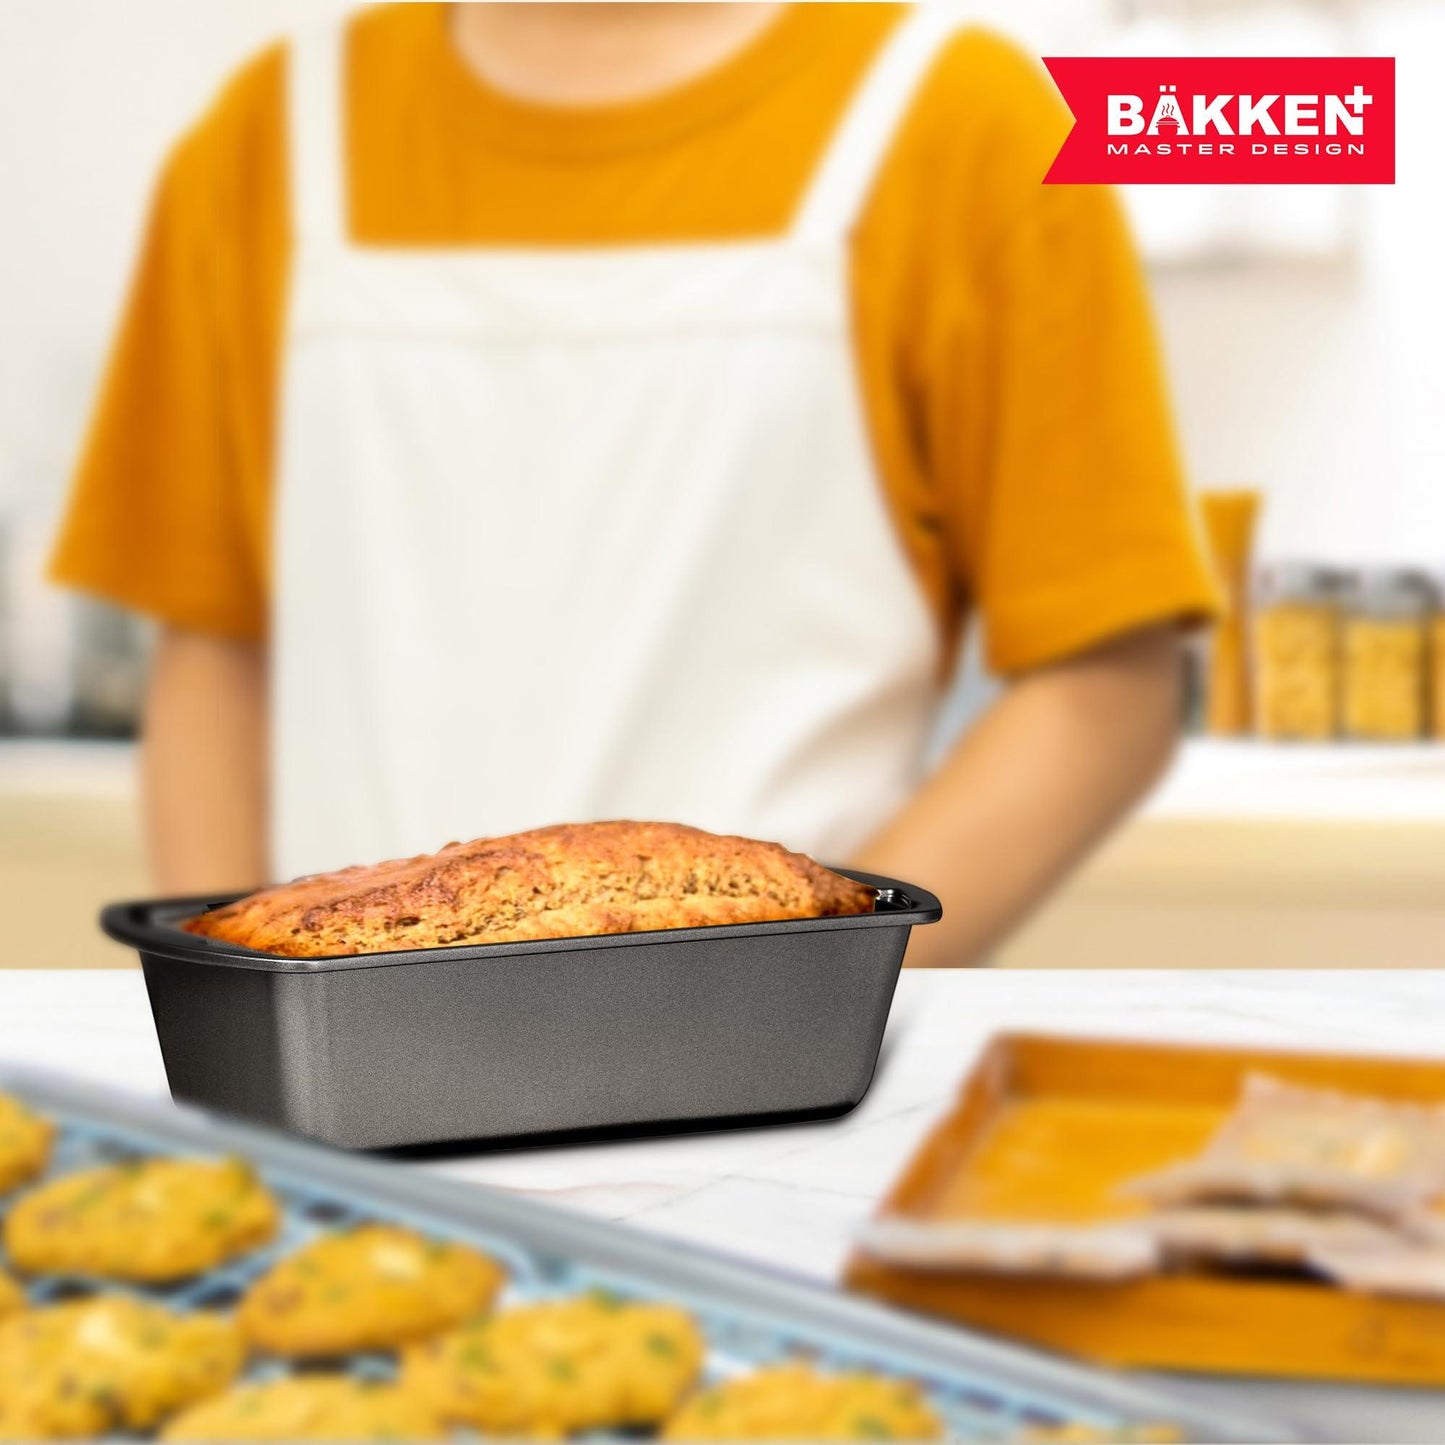 Bakken- Swiss Loaf Pan Set 4-Piece - Deluxe Nonstick Carbon Steel Bakeware for Perfect Bread and Cakes – Dishwasher Safe, Premium Pans for Home Baking - CookCave